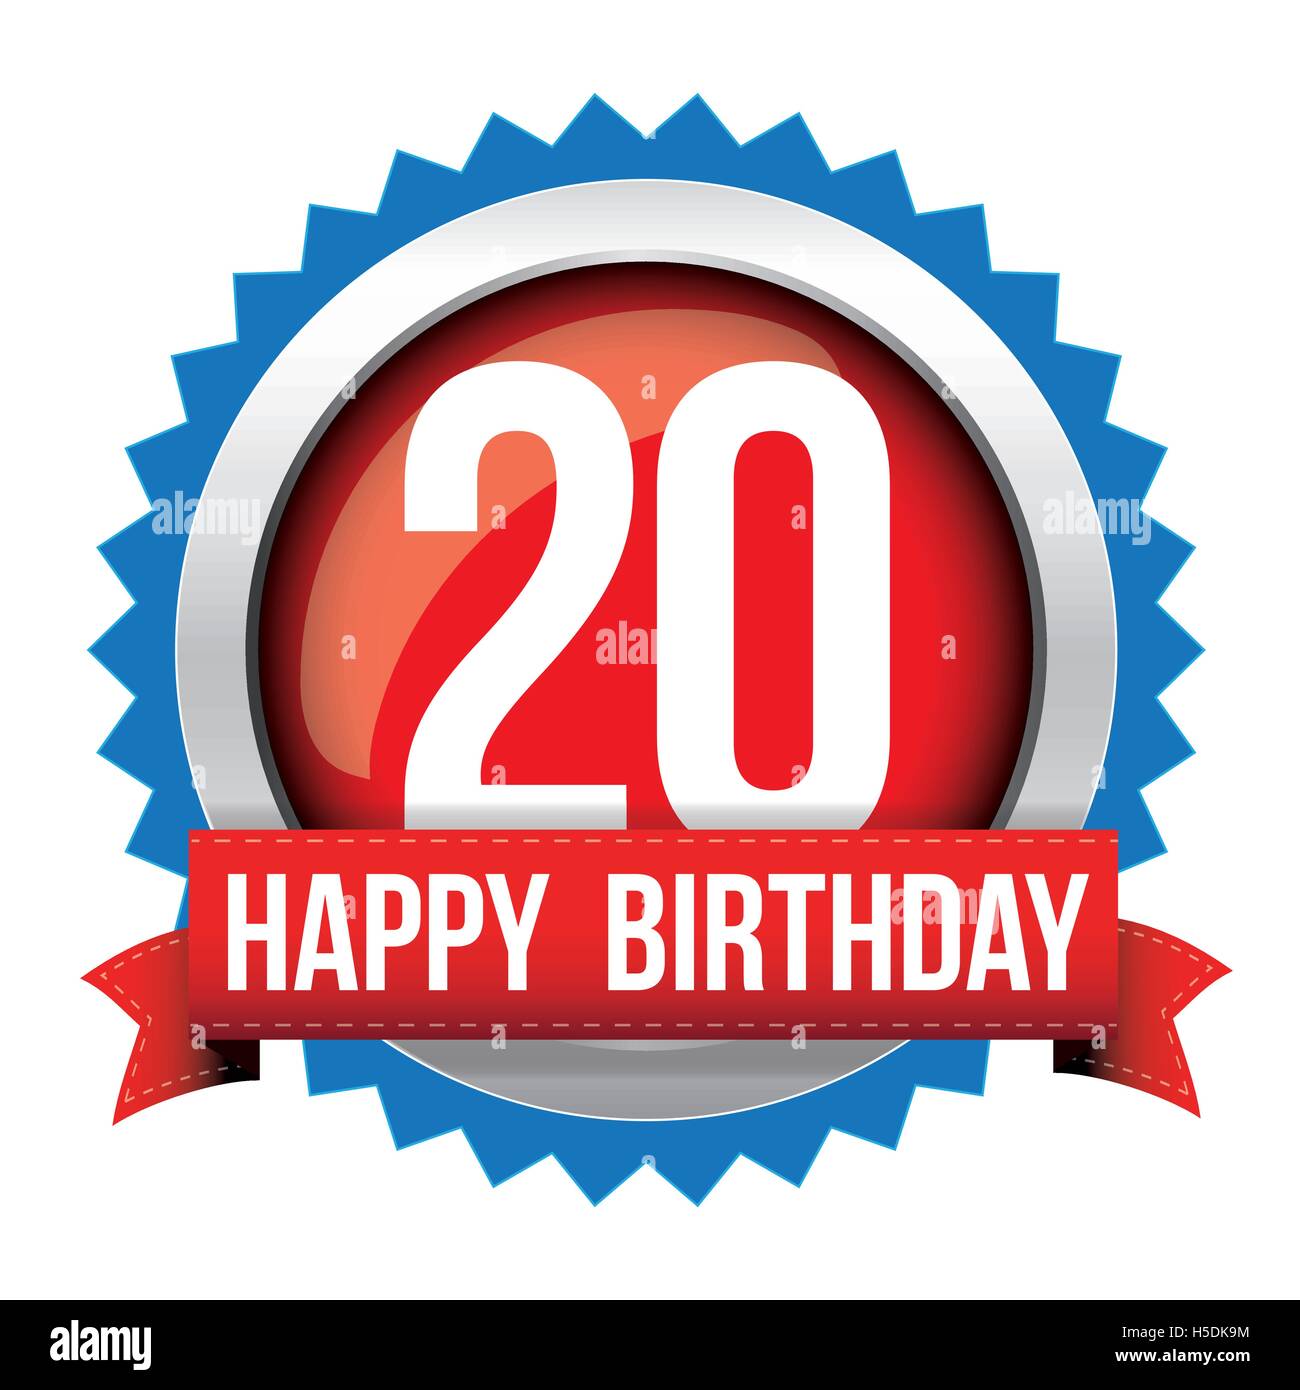 20th birthday Cut Out Stock Images & Pictures - Alamy